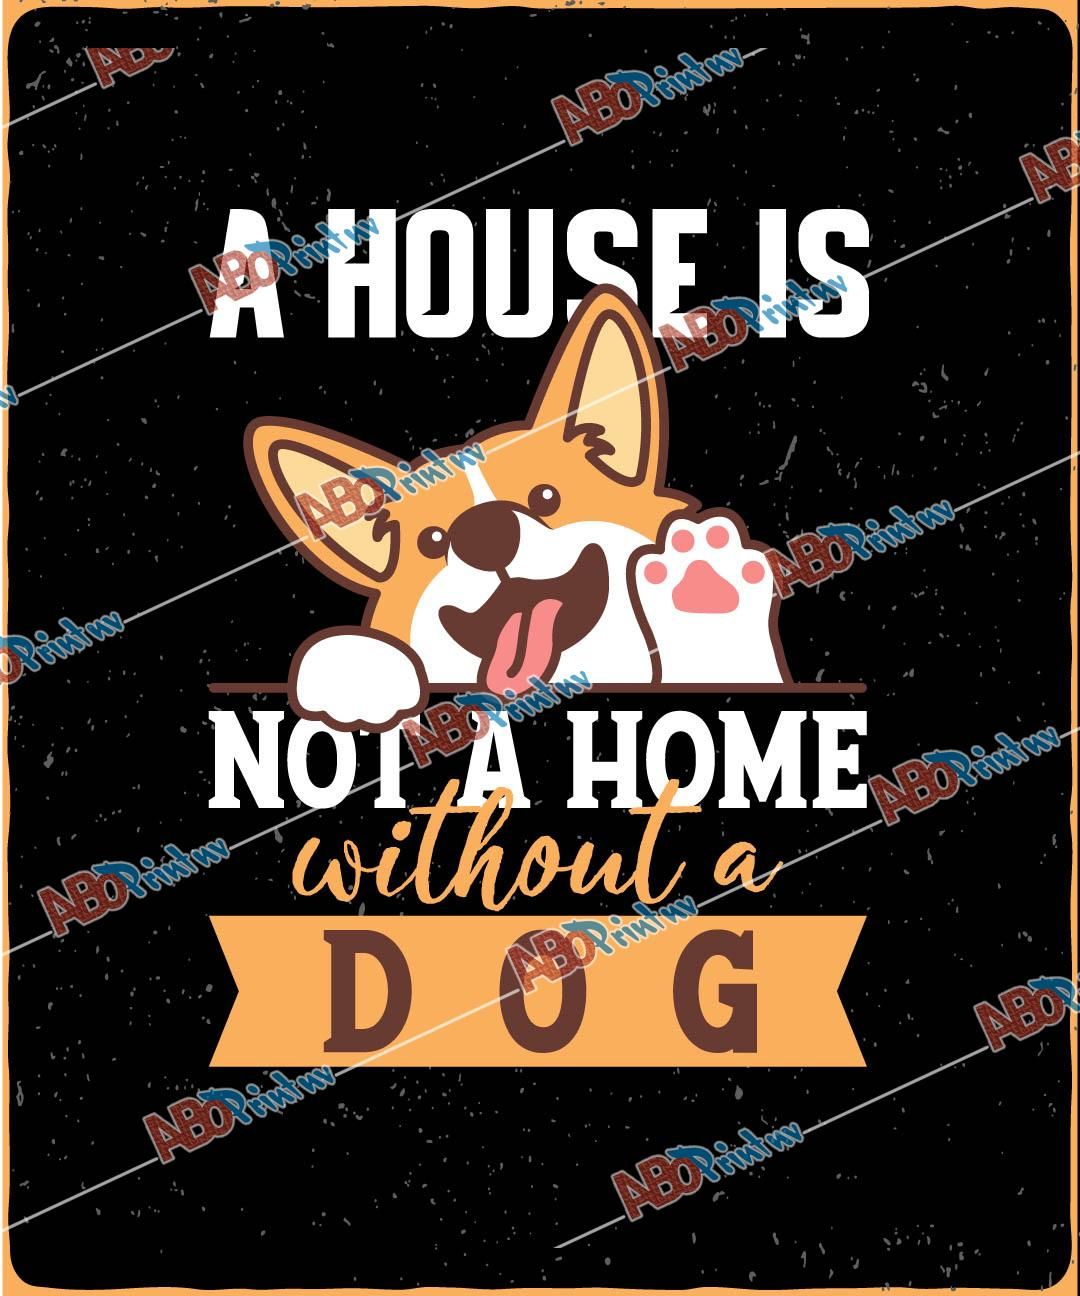 A house is not a home without a dogJPG (1).jpg